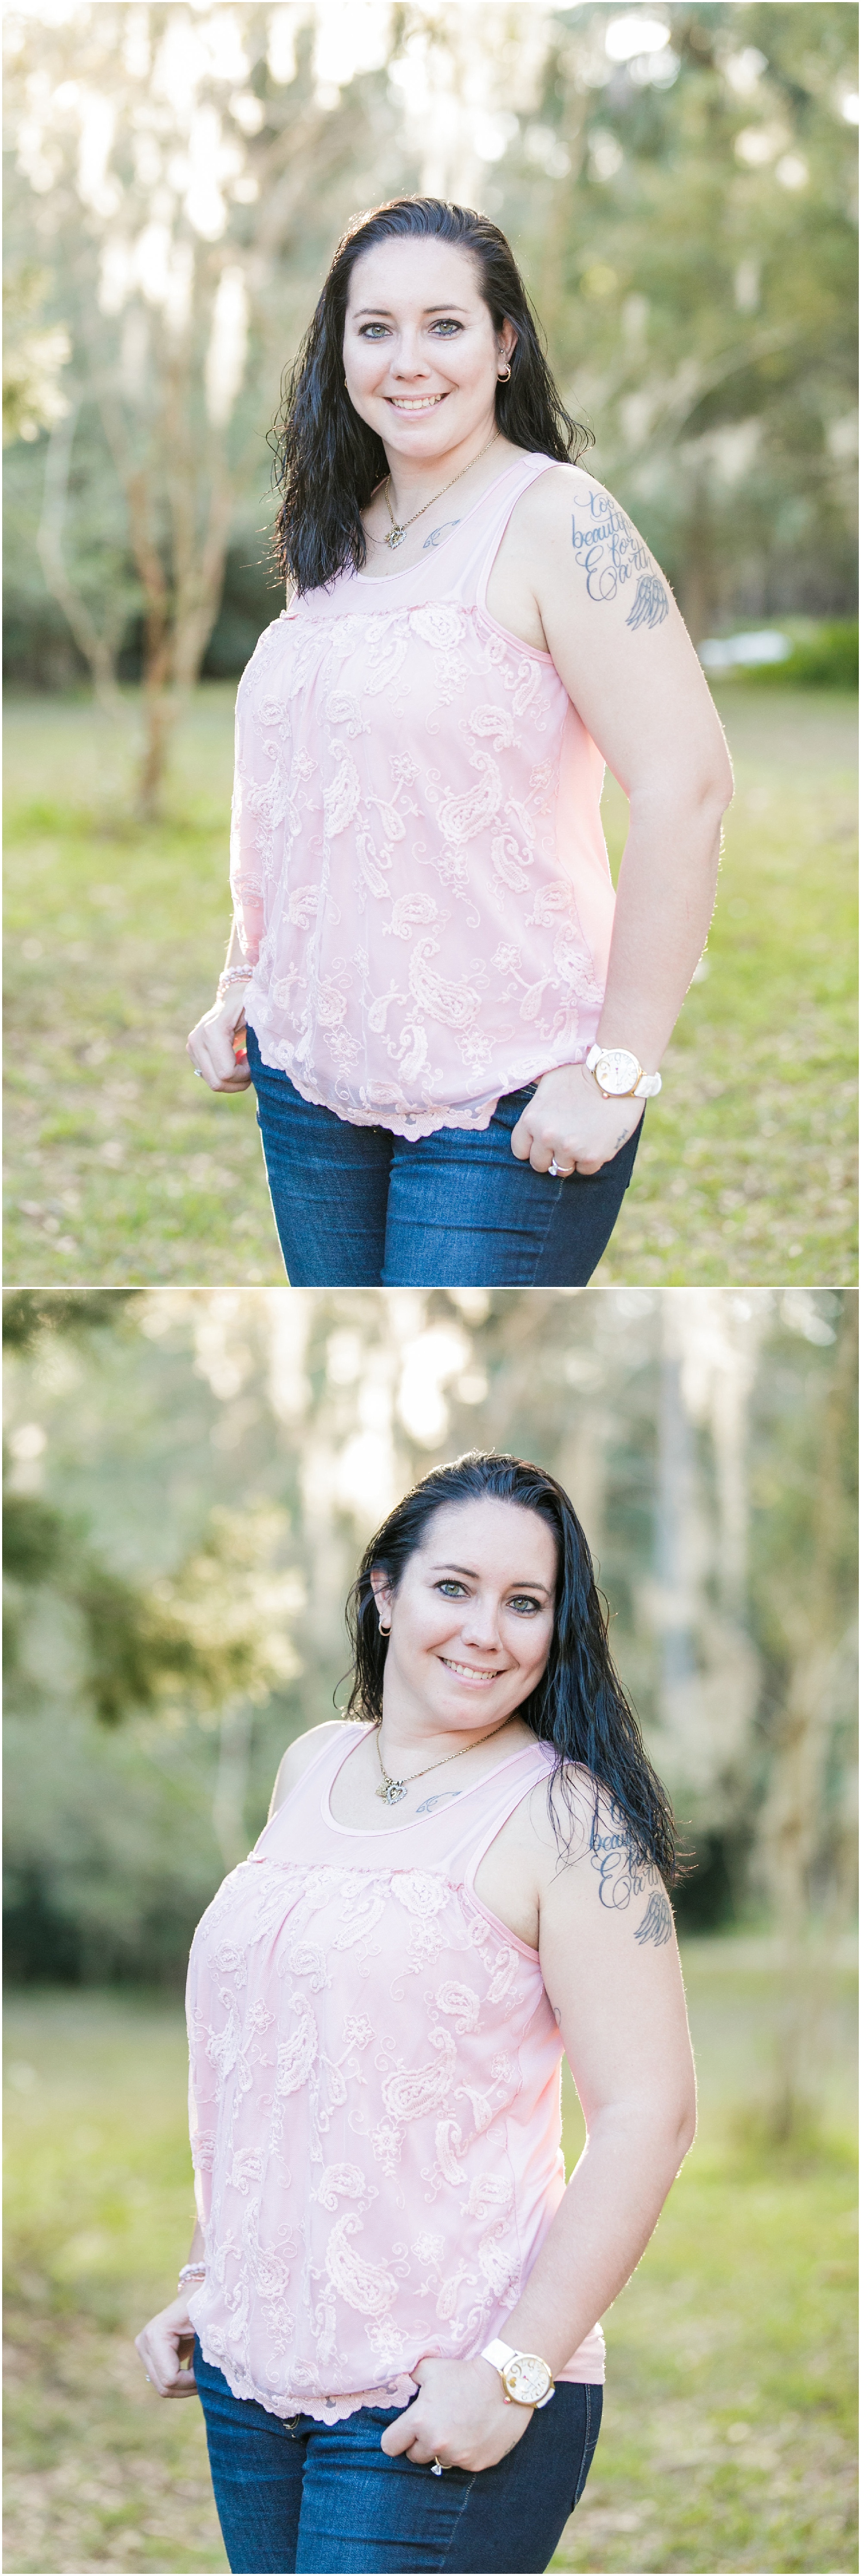 Portraits of the future bride at her engagement session wearing a pink top and blue jeans.